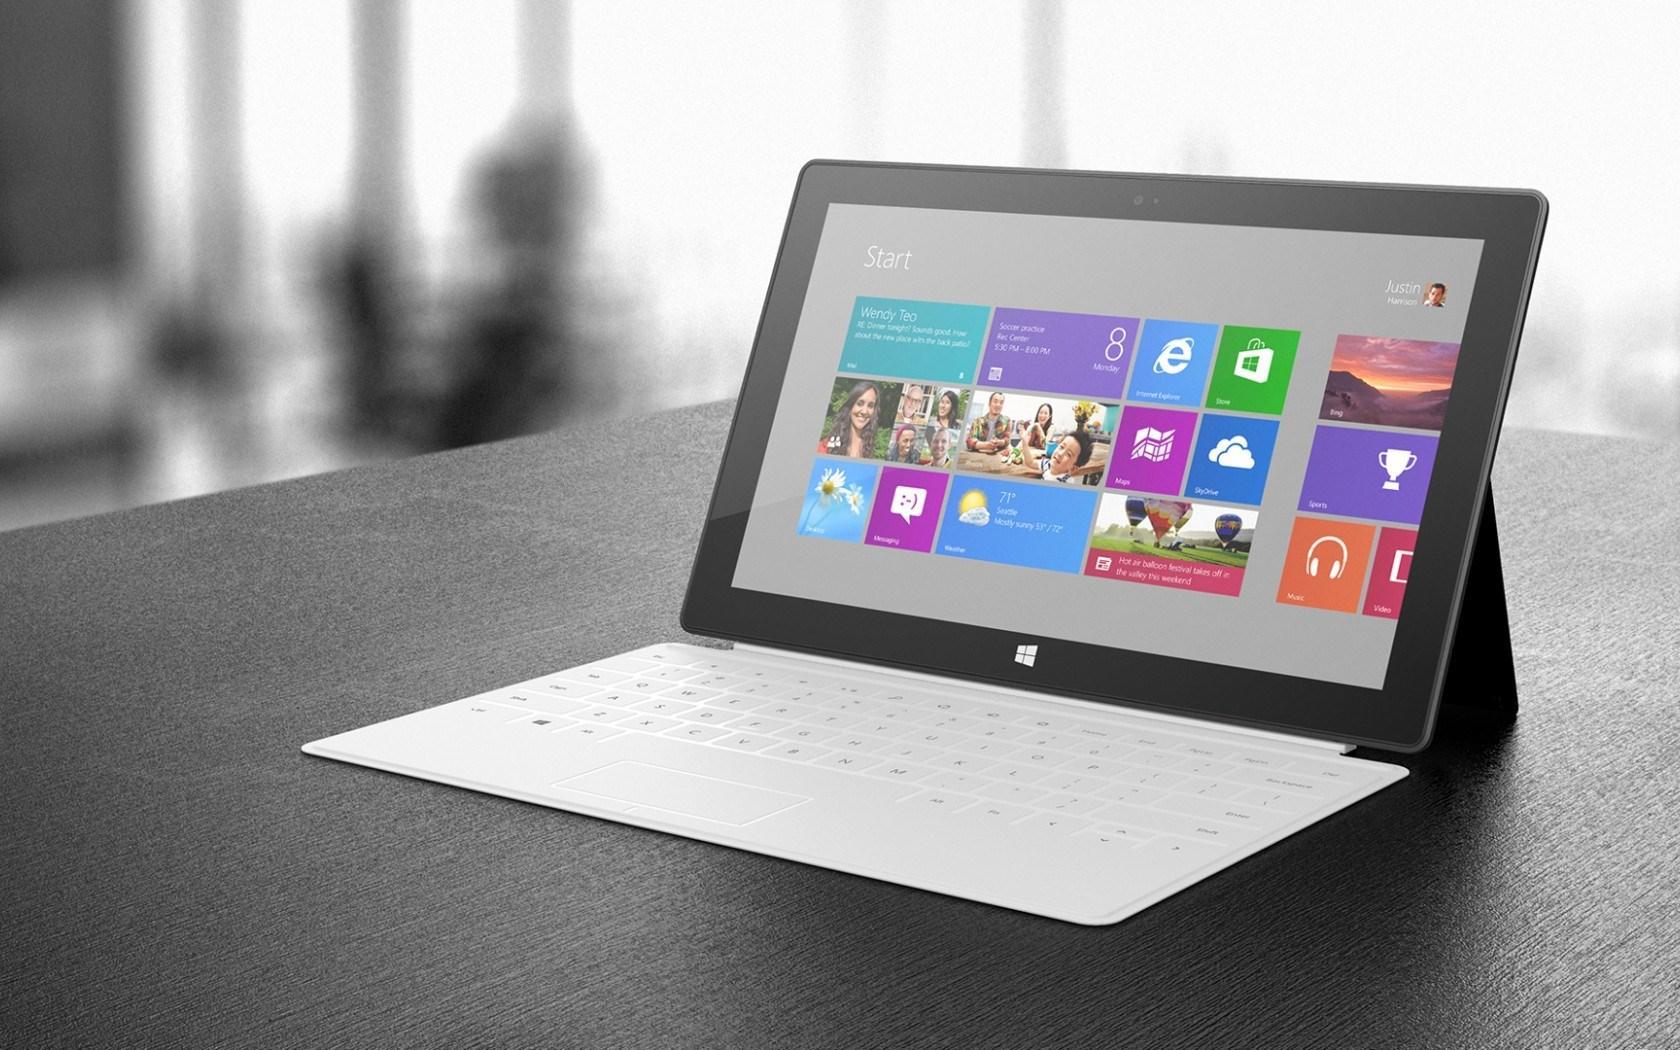 Surface 2 The Microsoft Tablet Windows 8 Hi-tech - Surface Pro White Keyboard , HD Wallpaper & Backgrounds